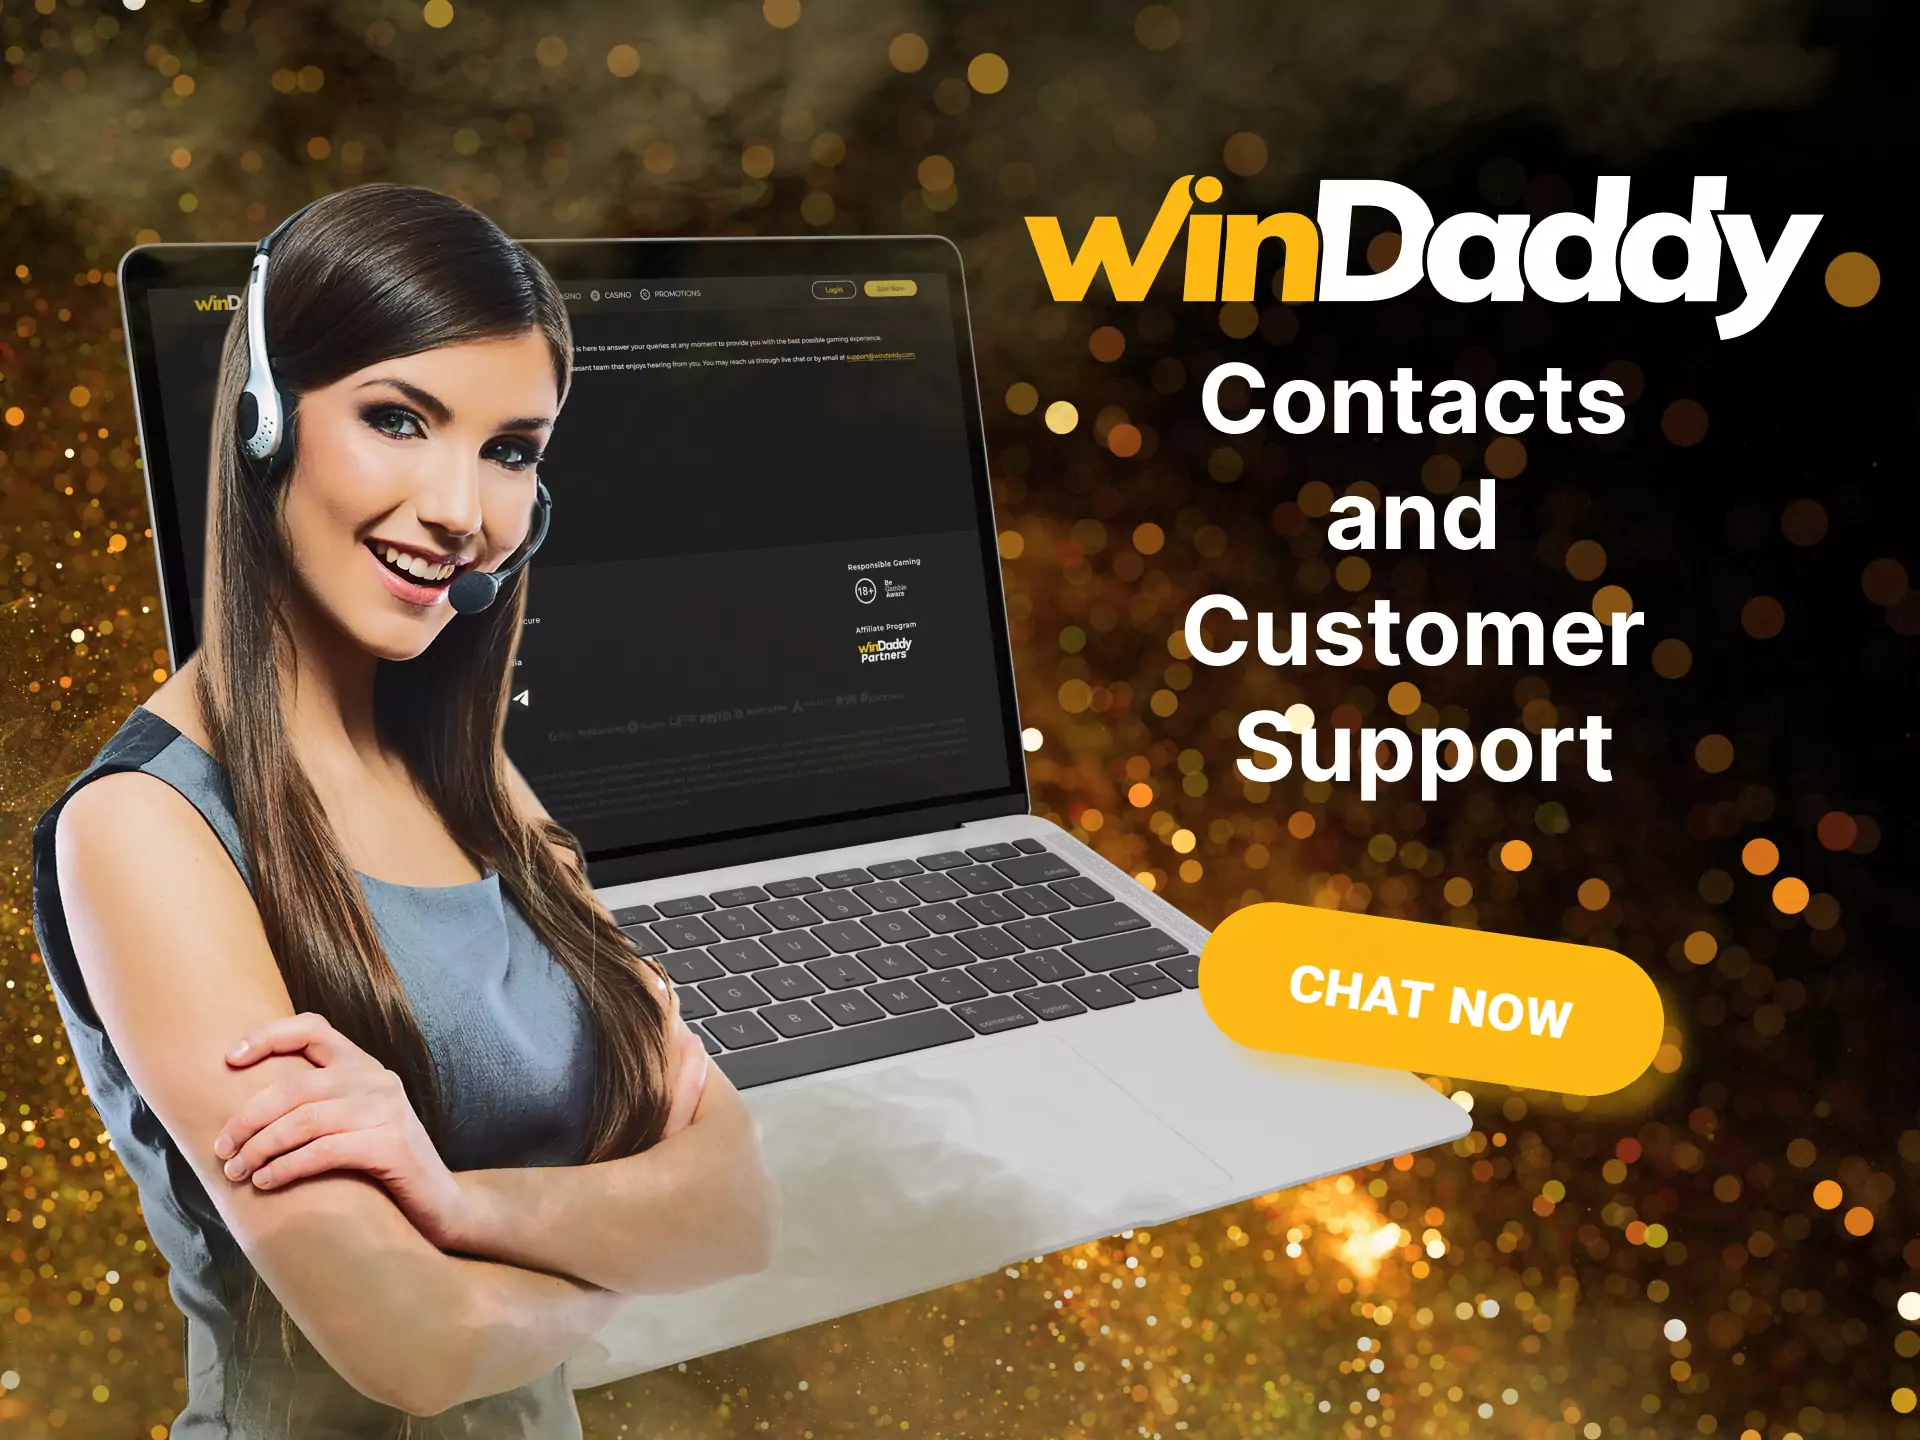 Windaddy support is always ready to help you and answer all your questions.